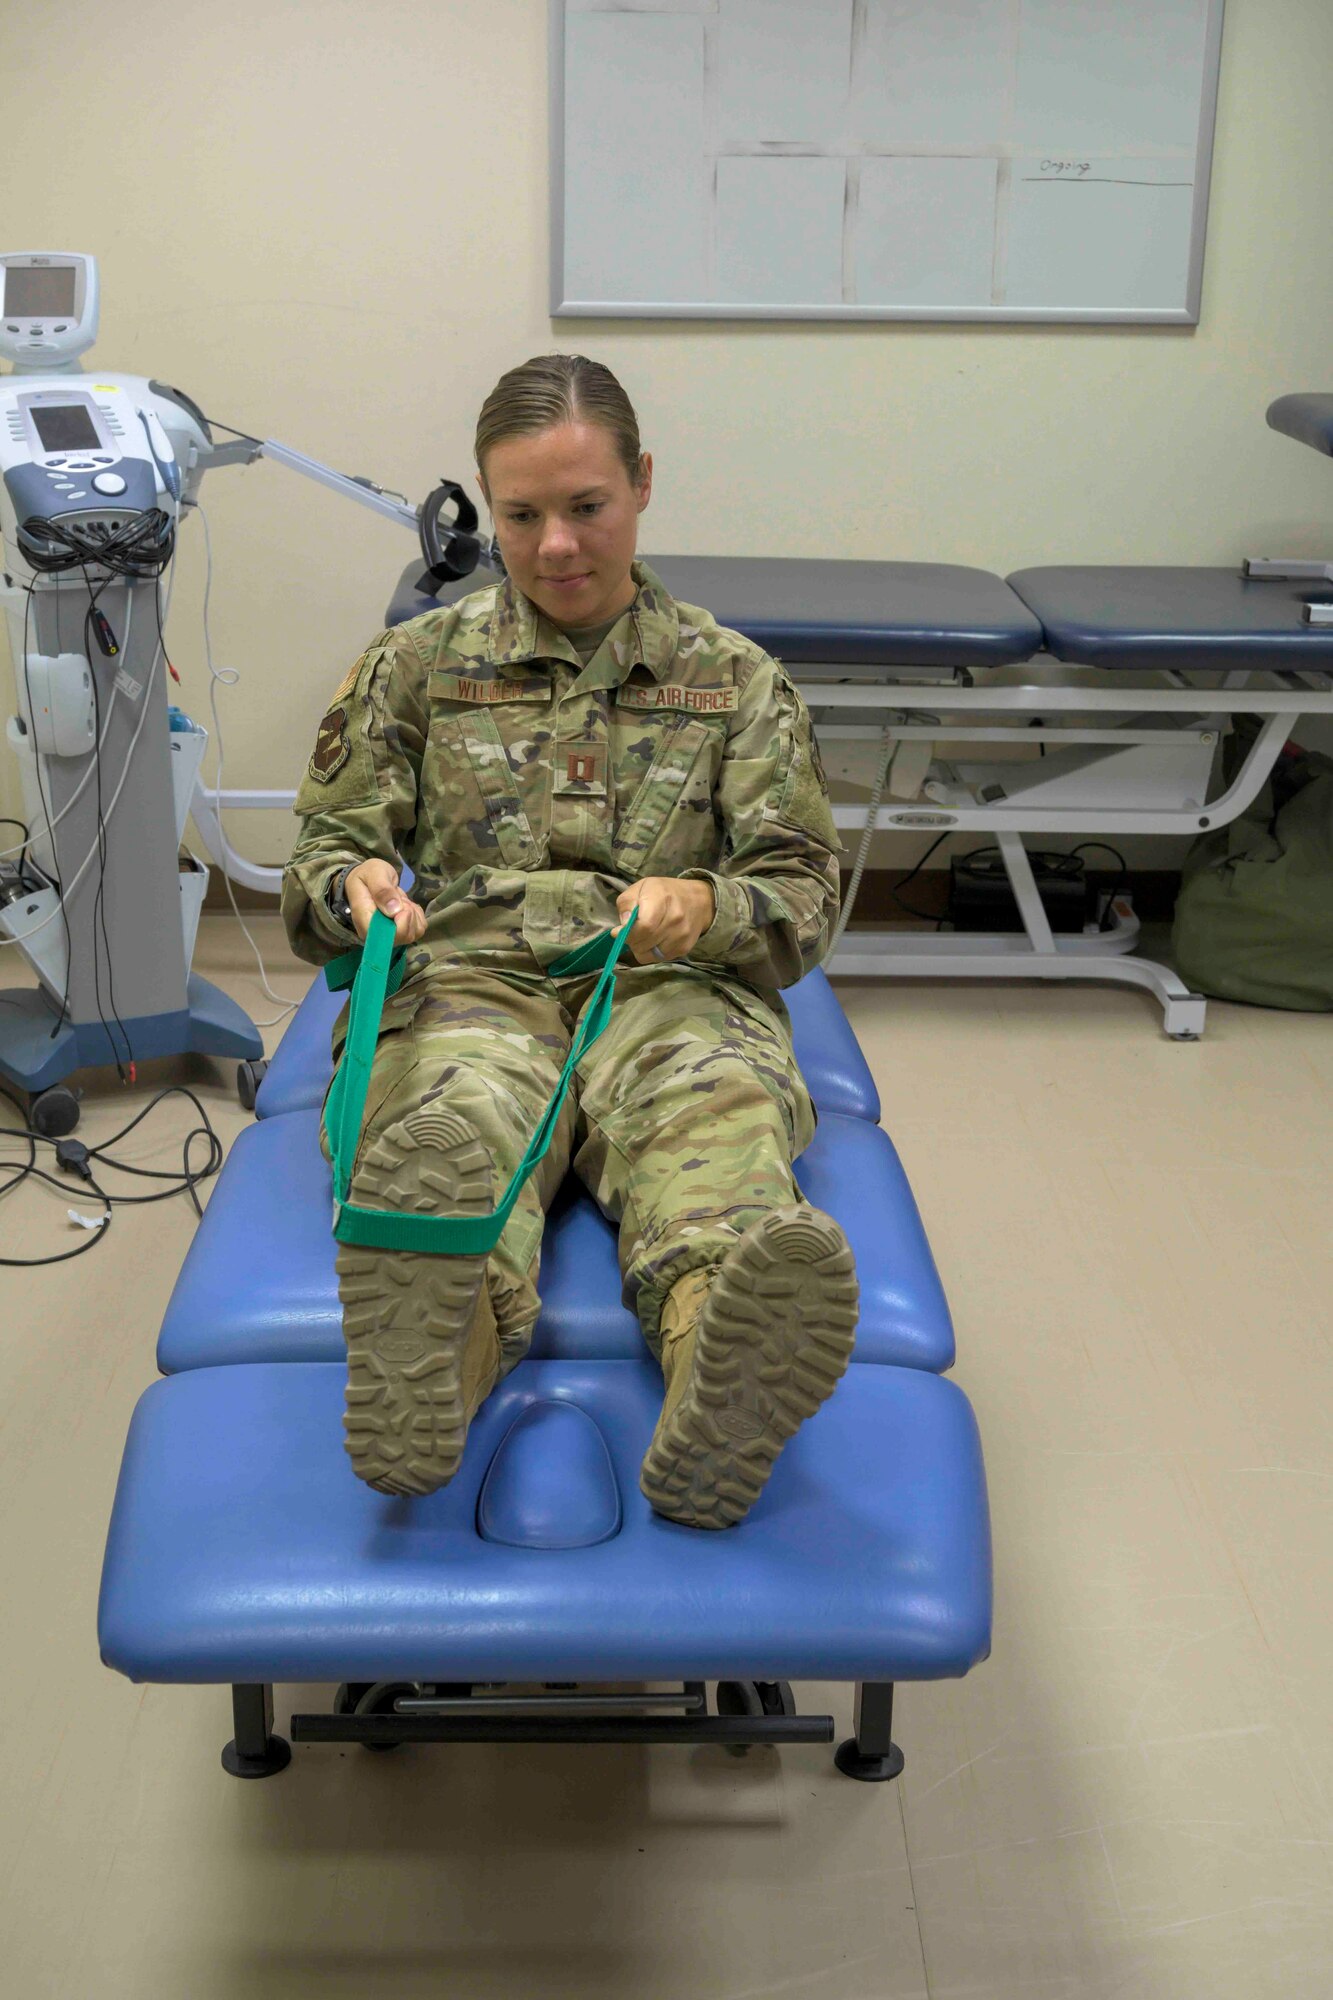 Physical therapists from the 380th Expeditionary Medical Group demonstrate common exercises used during physical therapy sessions, Al Dhafra Air Base (ADAB), United Arab Emirates, May 26, 2021. Physical therapy services are available at ADAB and include but are not limited to, therapeutic exercise, manual manipulation, and dry needling.